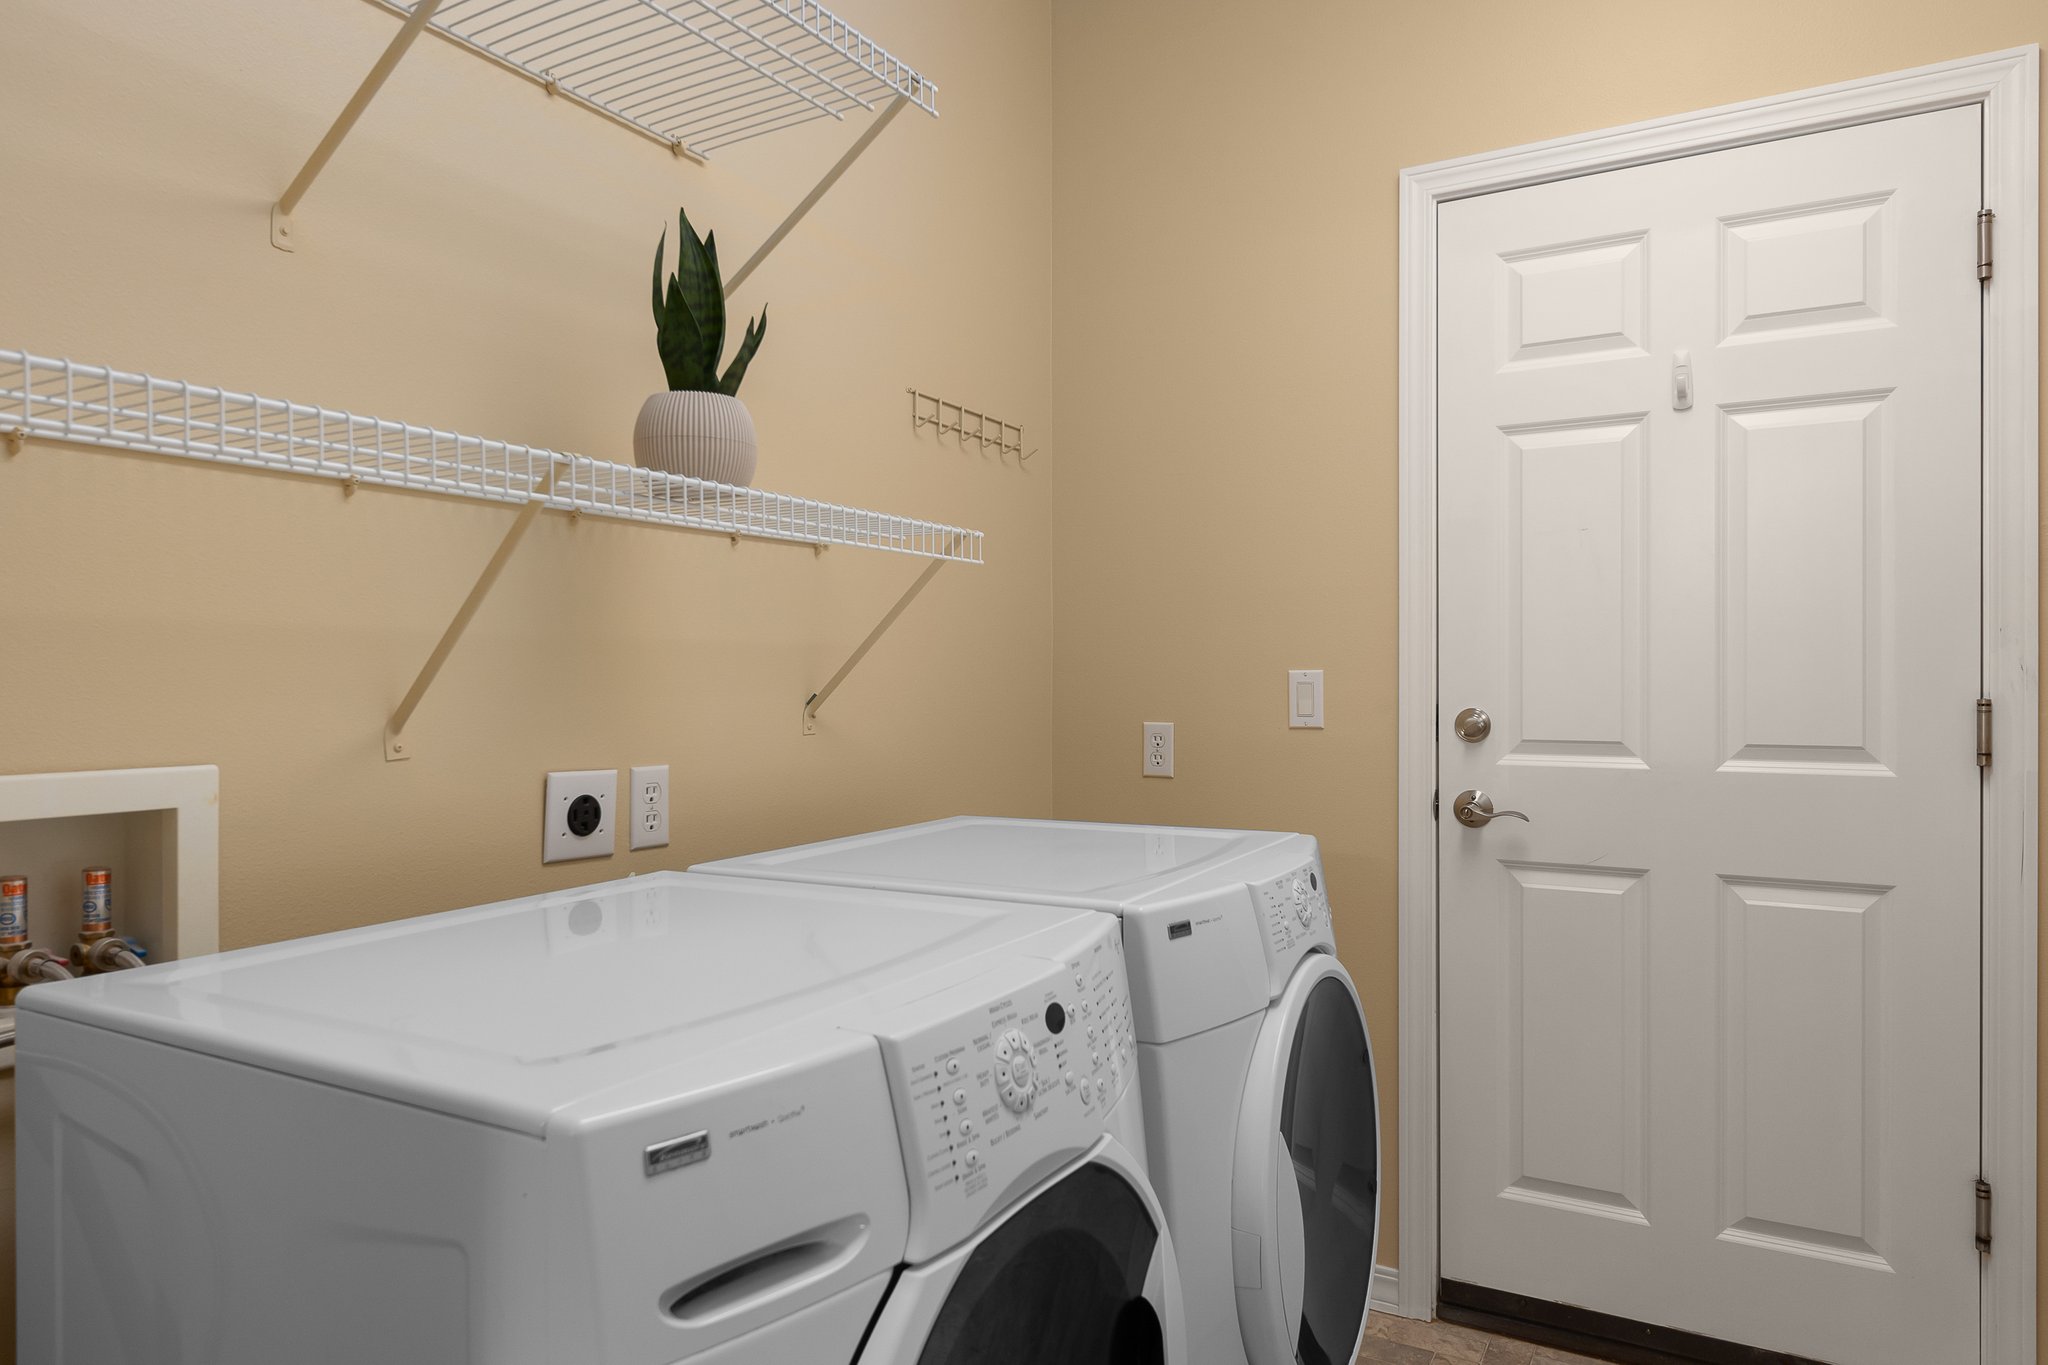 Main floor laundry with additional storage.